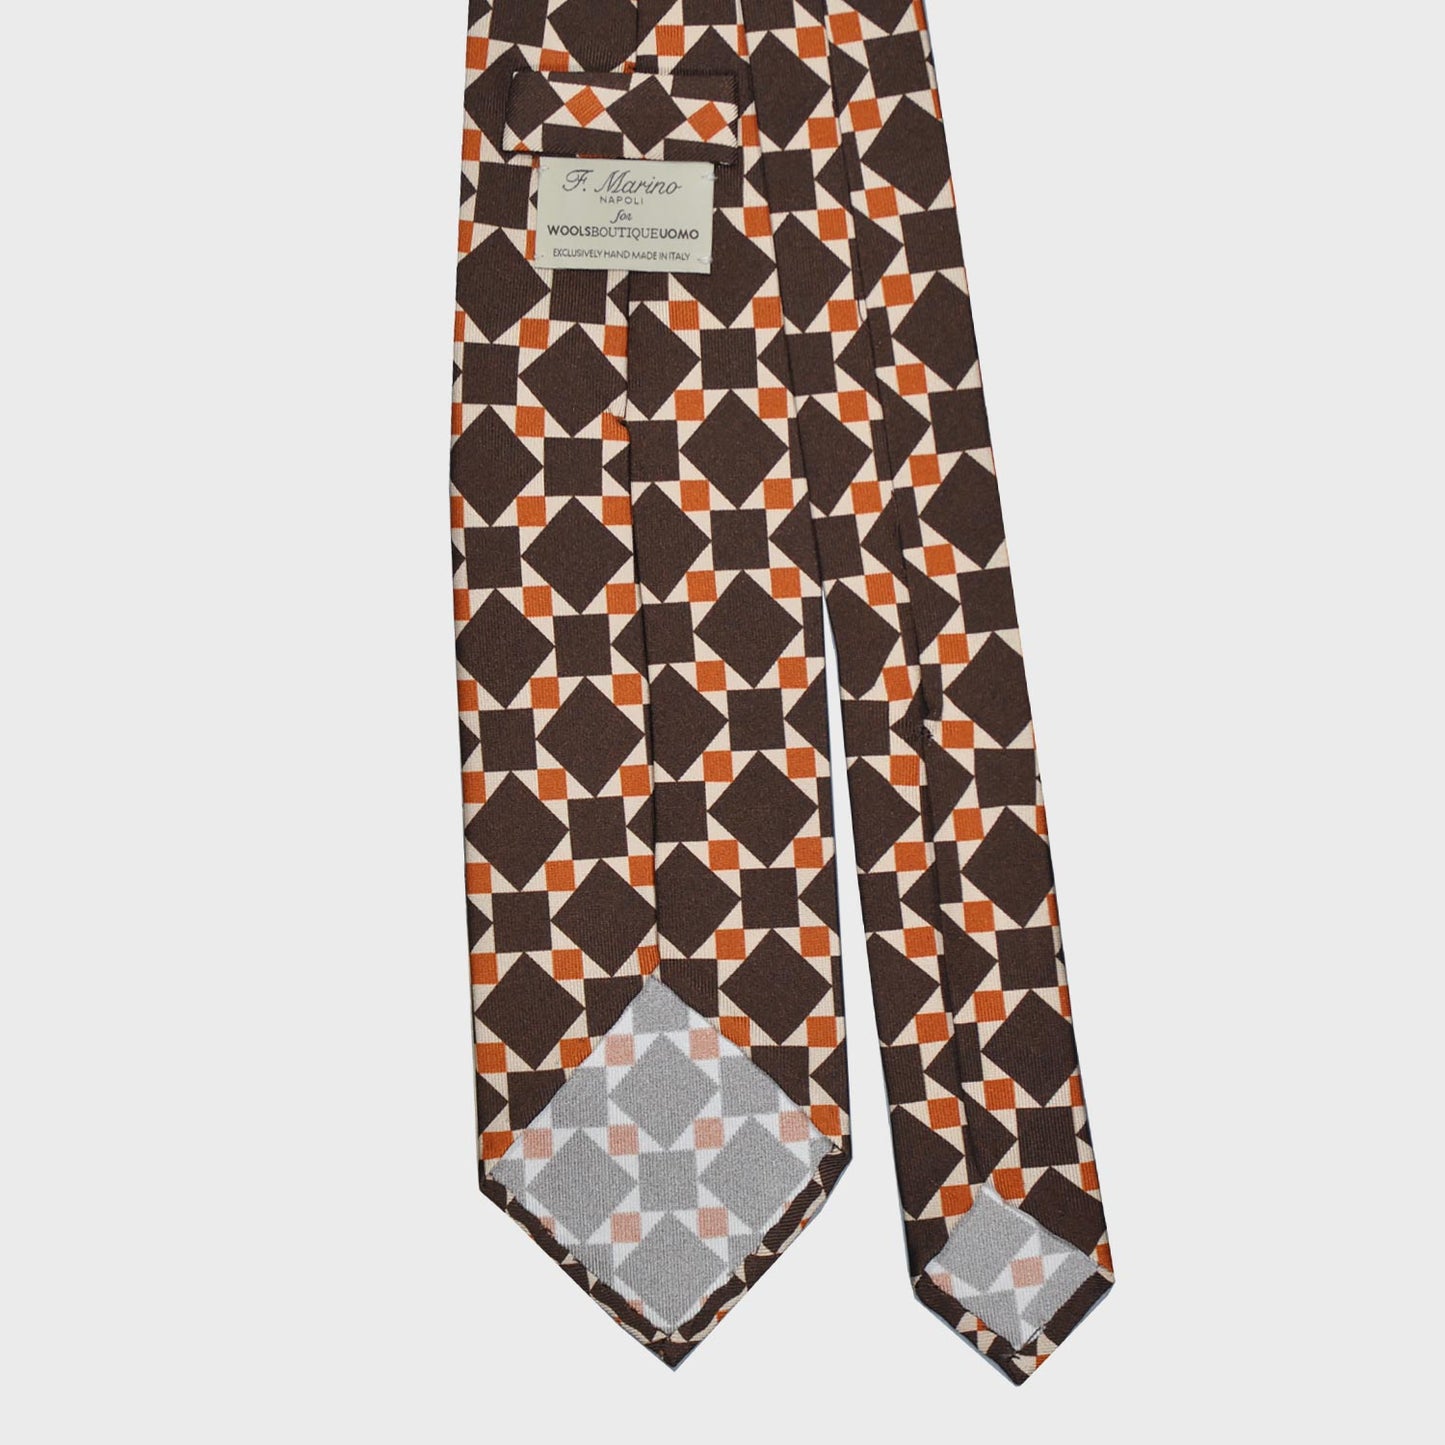 Exclusive silk tie made with finest Italian silk soft to the touch, sand beige background with coffee brown and orange mosaic pattern, unlined tie 3 folds, F.Marino Napoli ties exclusive for Wools Boutique Uomo